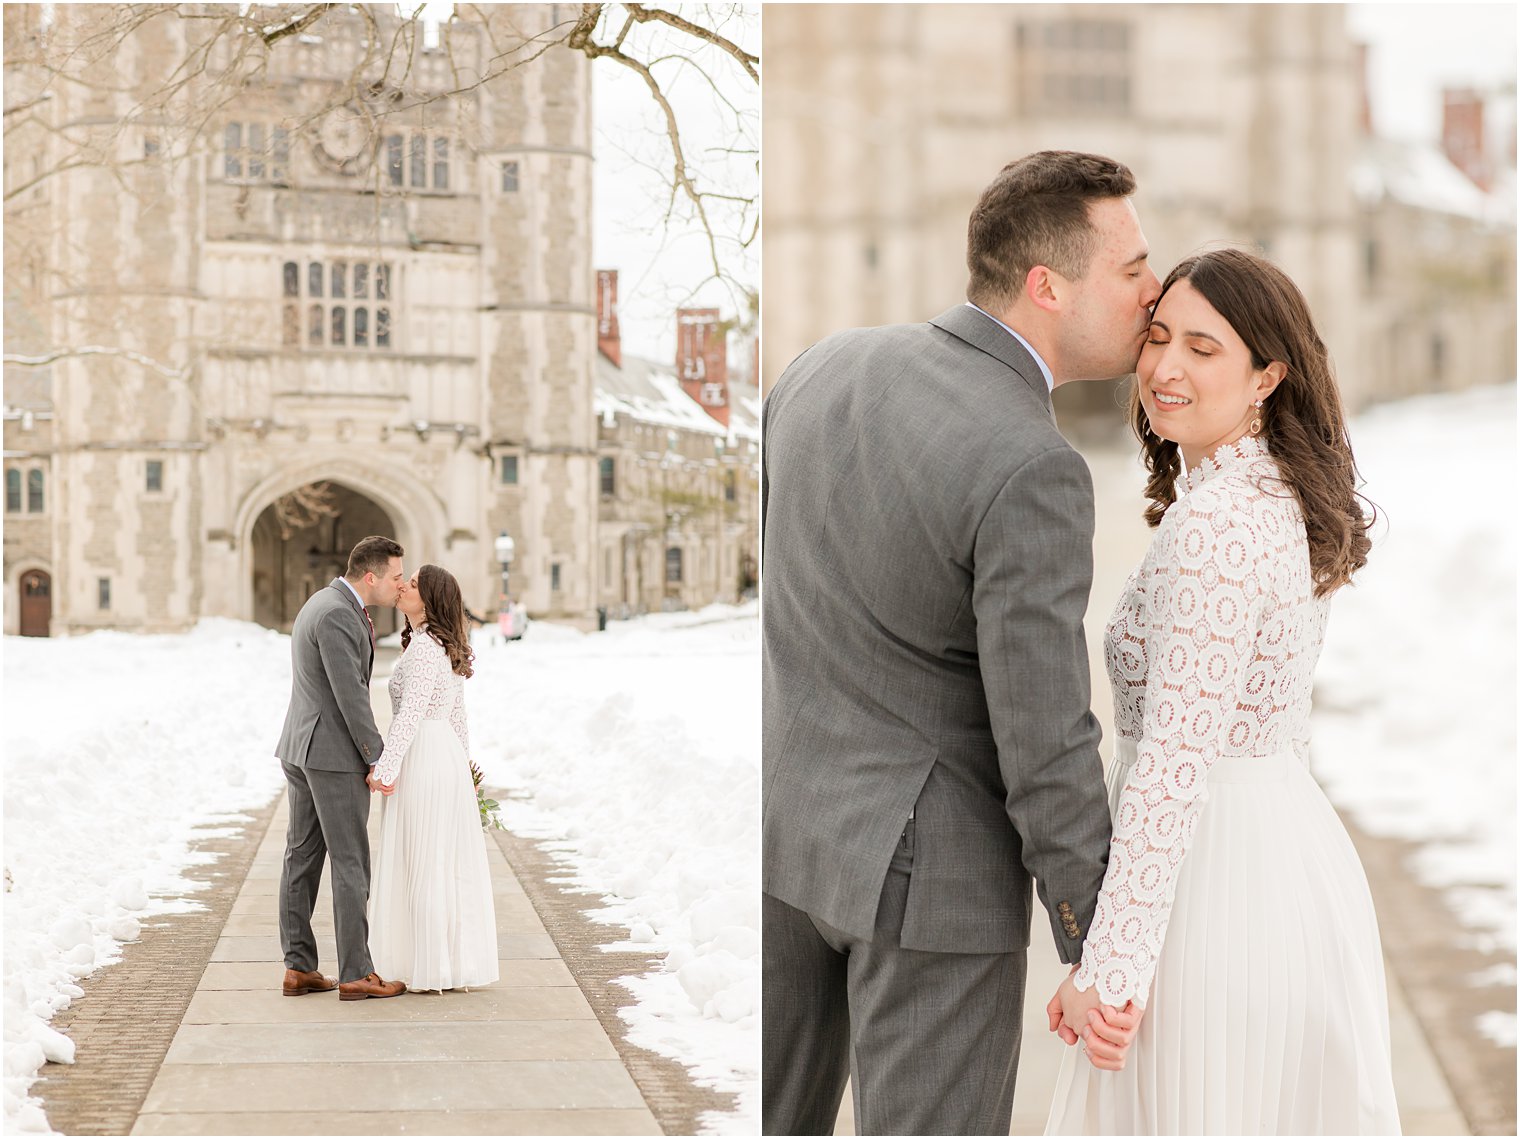 groom gives bride a kiss on New Jersey wedding day in the snow